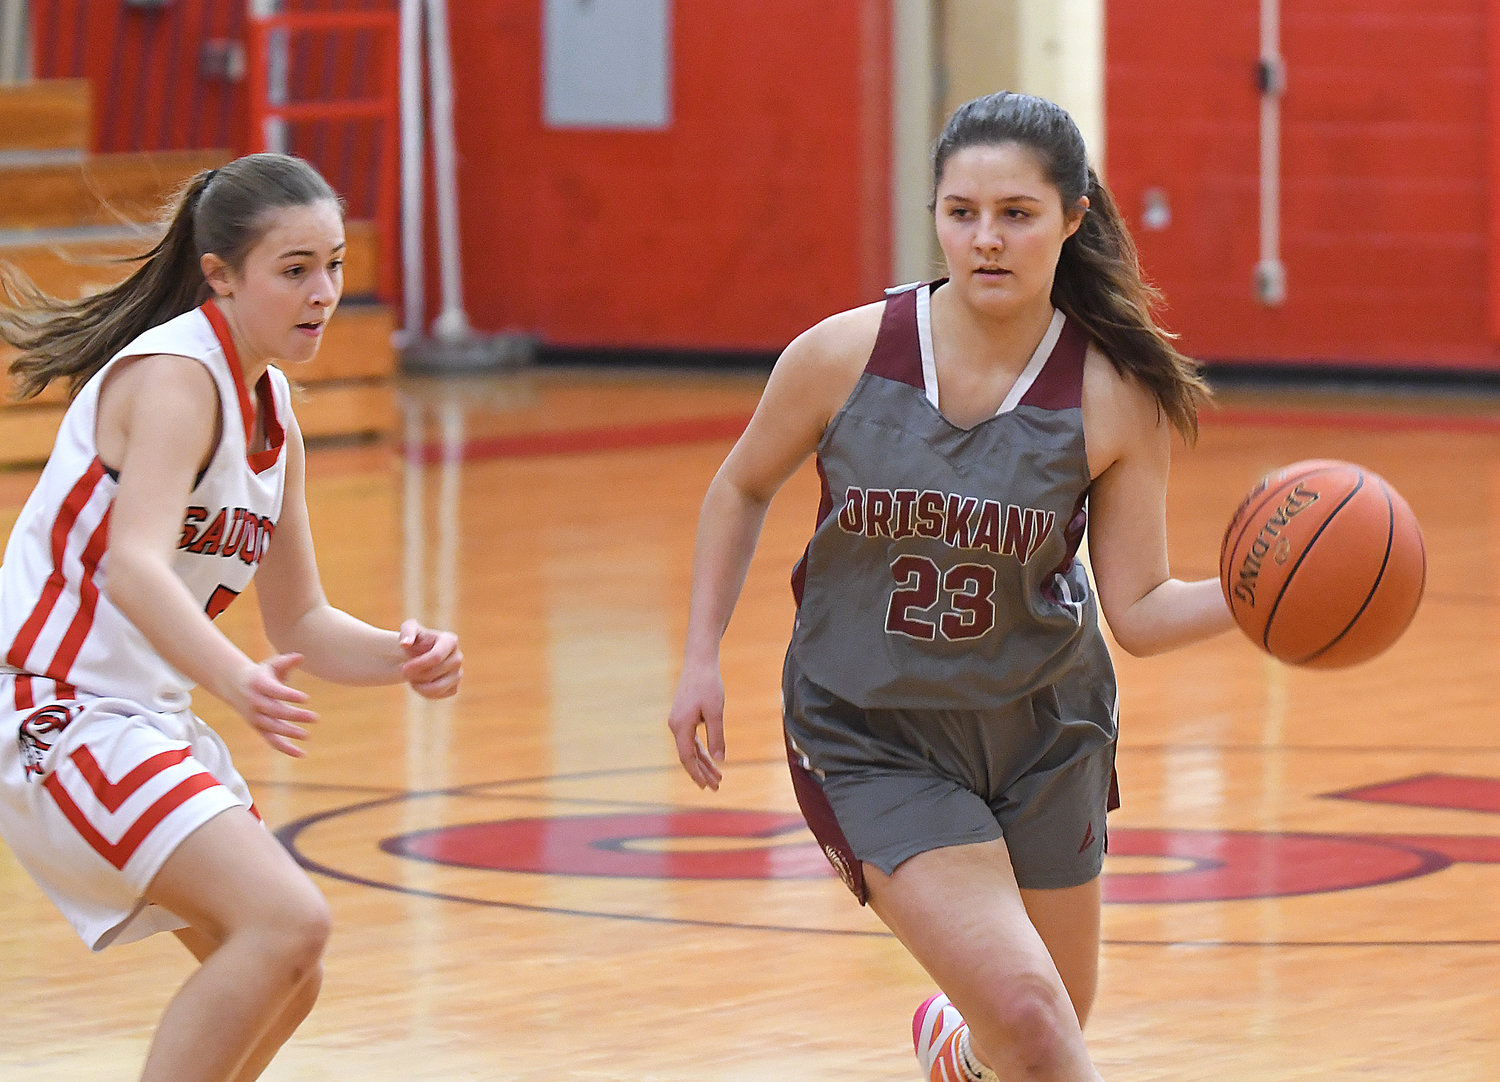 Oriskany's Jordyn Coleman dribbles up the lane defended by Sauquoit Valley's Julia Zegarelli in the first quarter Wednesday night at Sauquoit Valeey High School. Coleman led her team with 13 points in a 44-30 win.